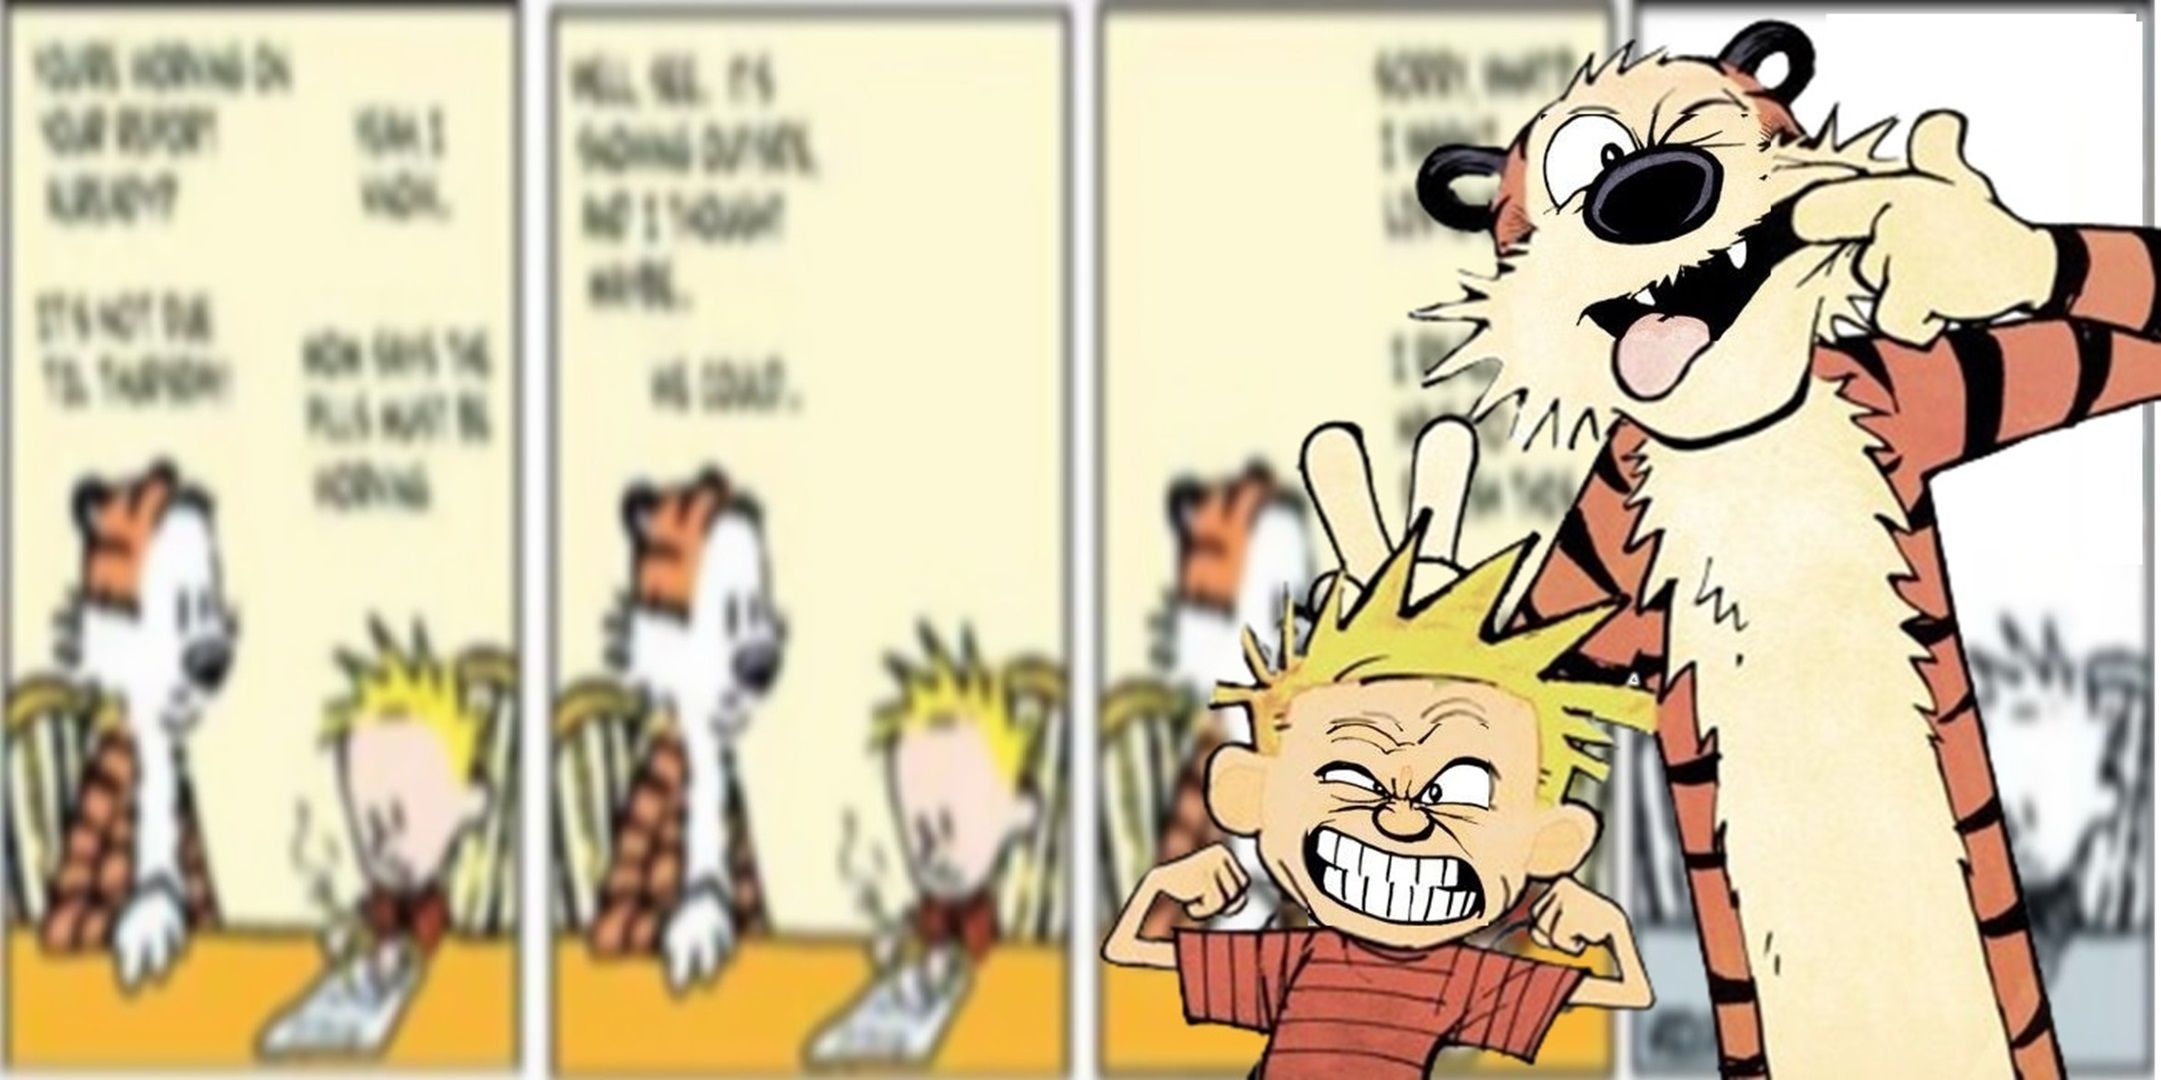 Calvin and Hobbes placed over a fake Calvin and Hobbes comic strip